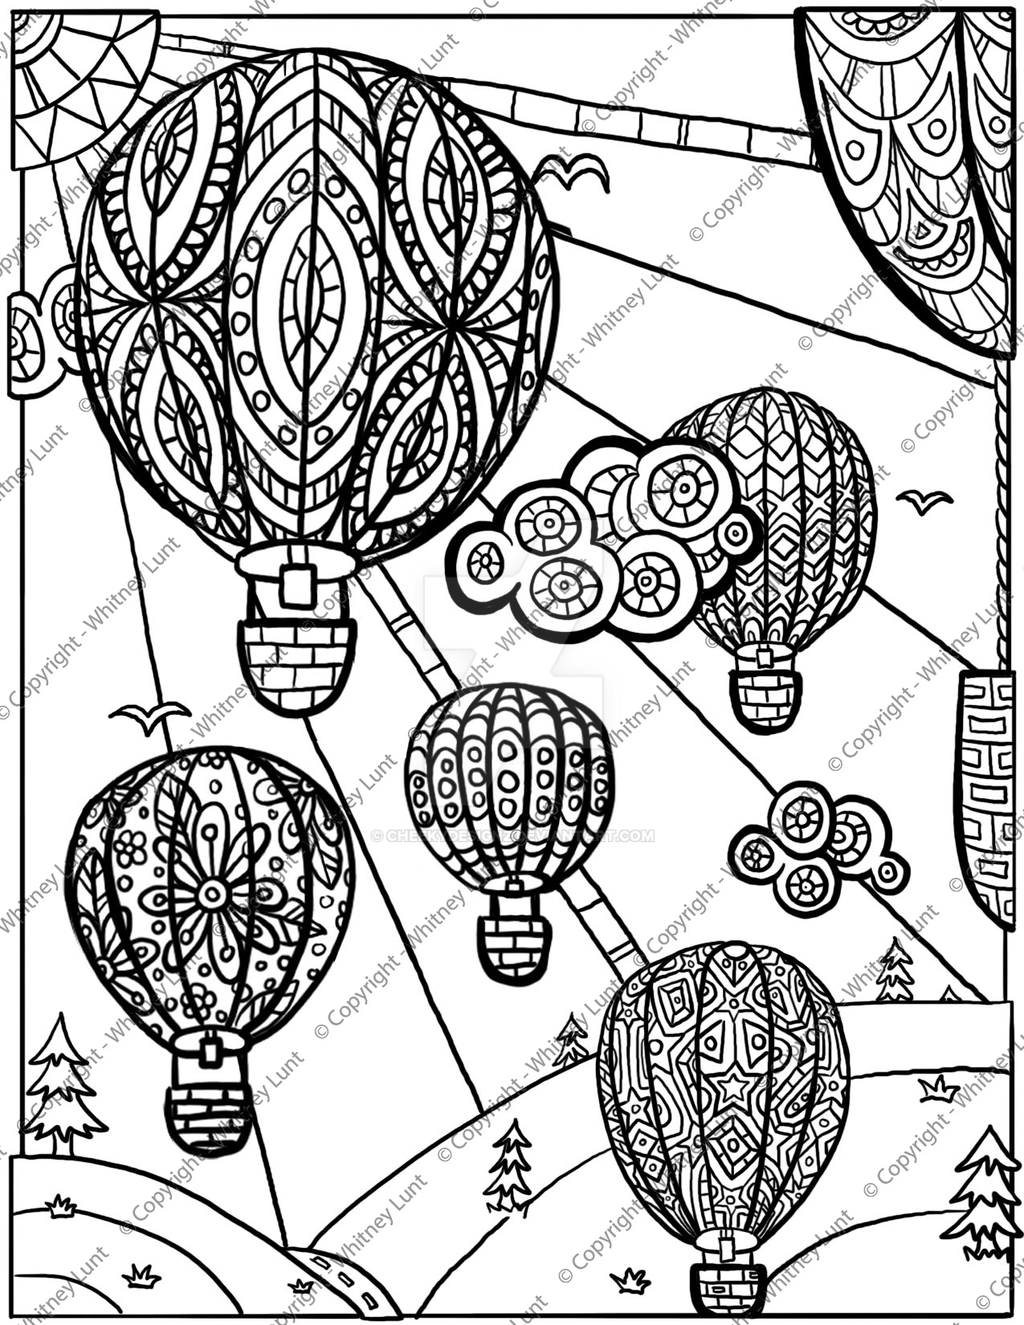 Hot Air Balloon Coloring Page by Cheekydesignz on DeviantArt